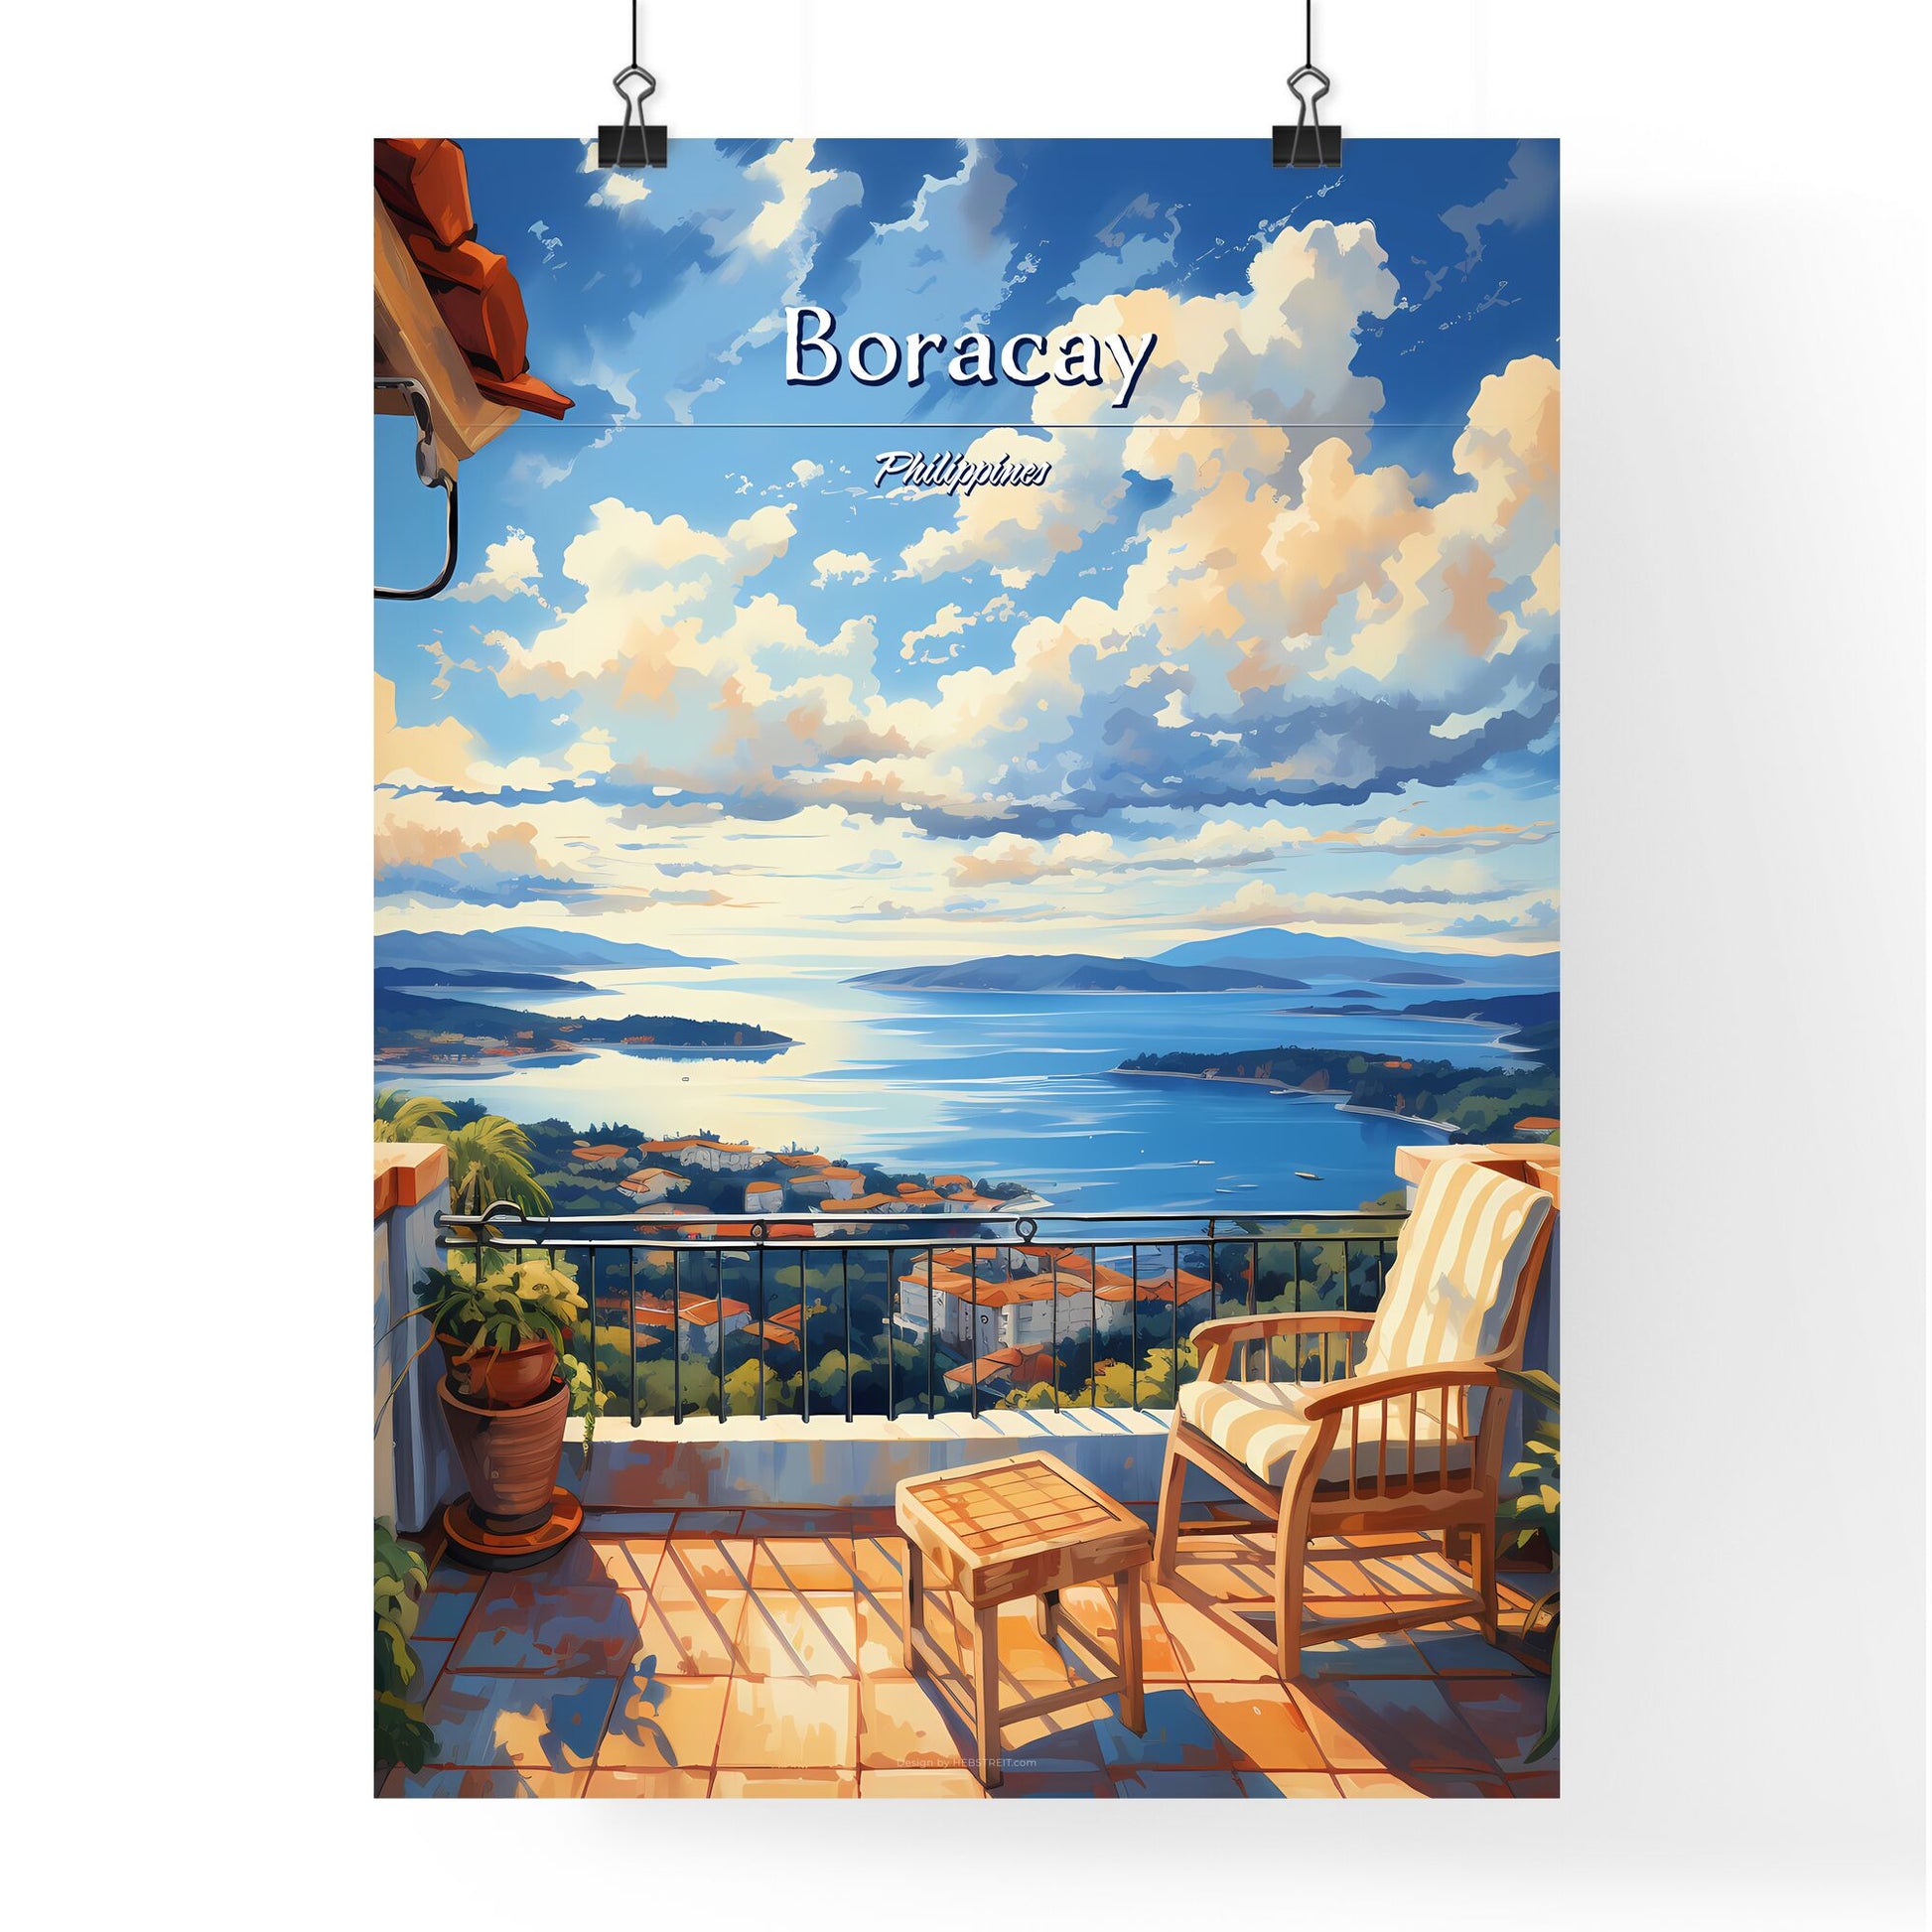 On the roofs of Boracay, Philippines - Art print of a chair on a balcony overlooking a body of water Default Title